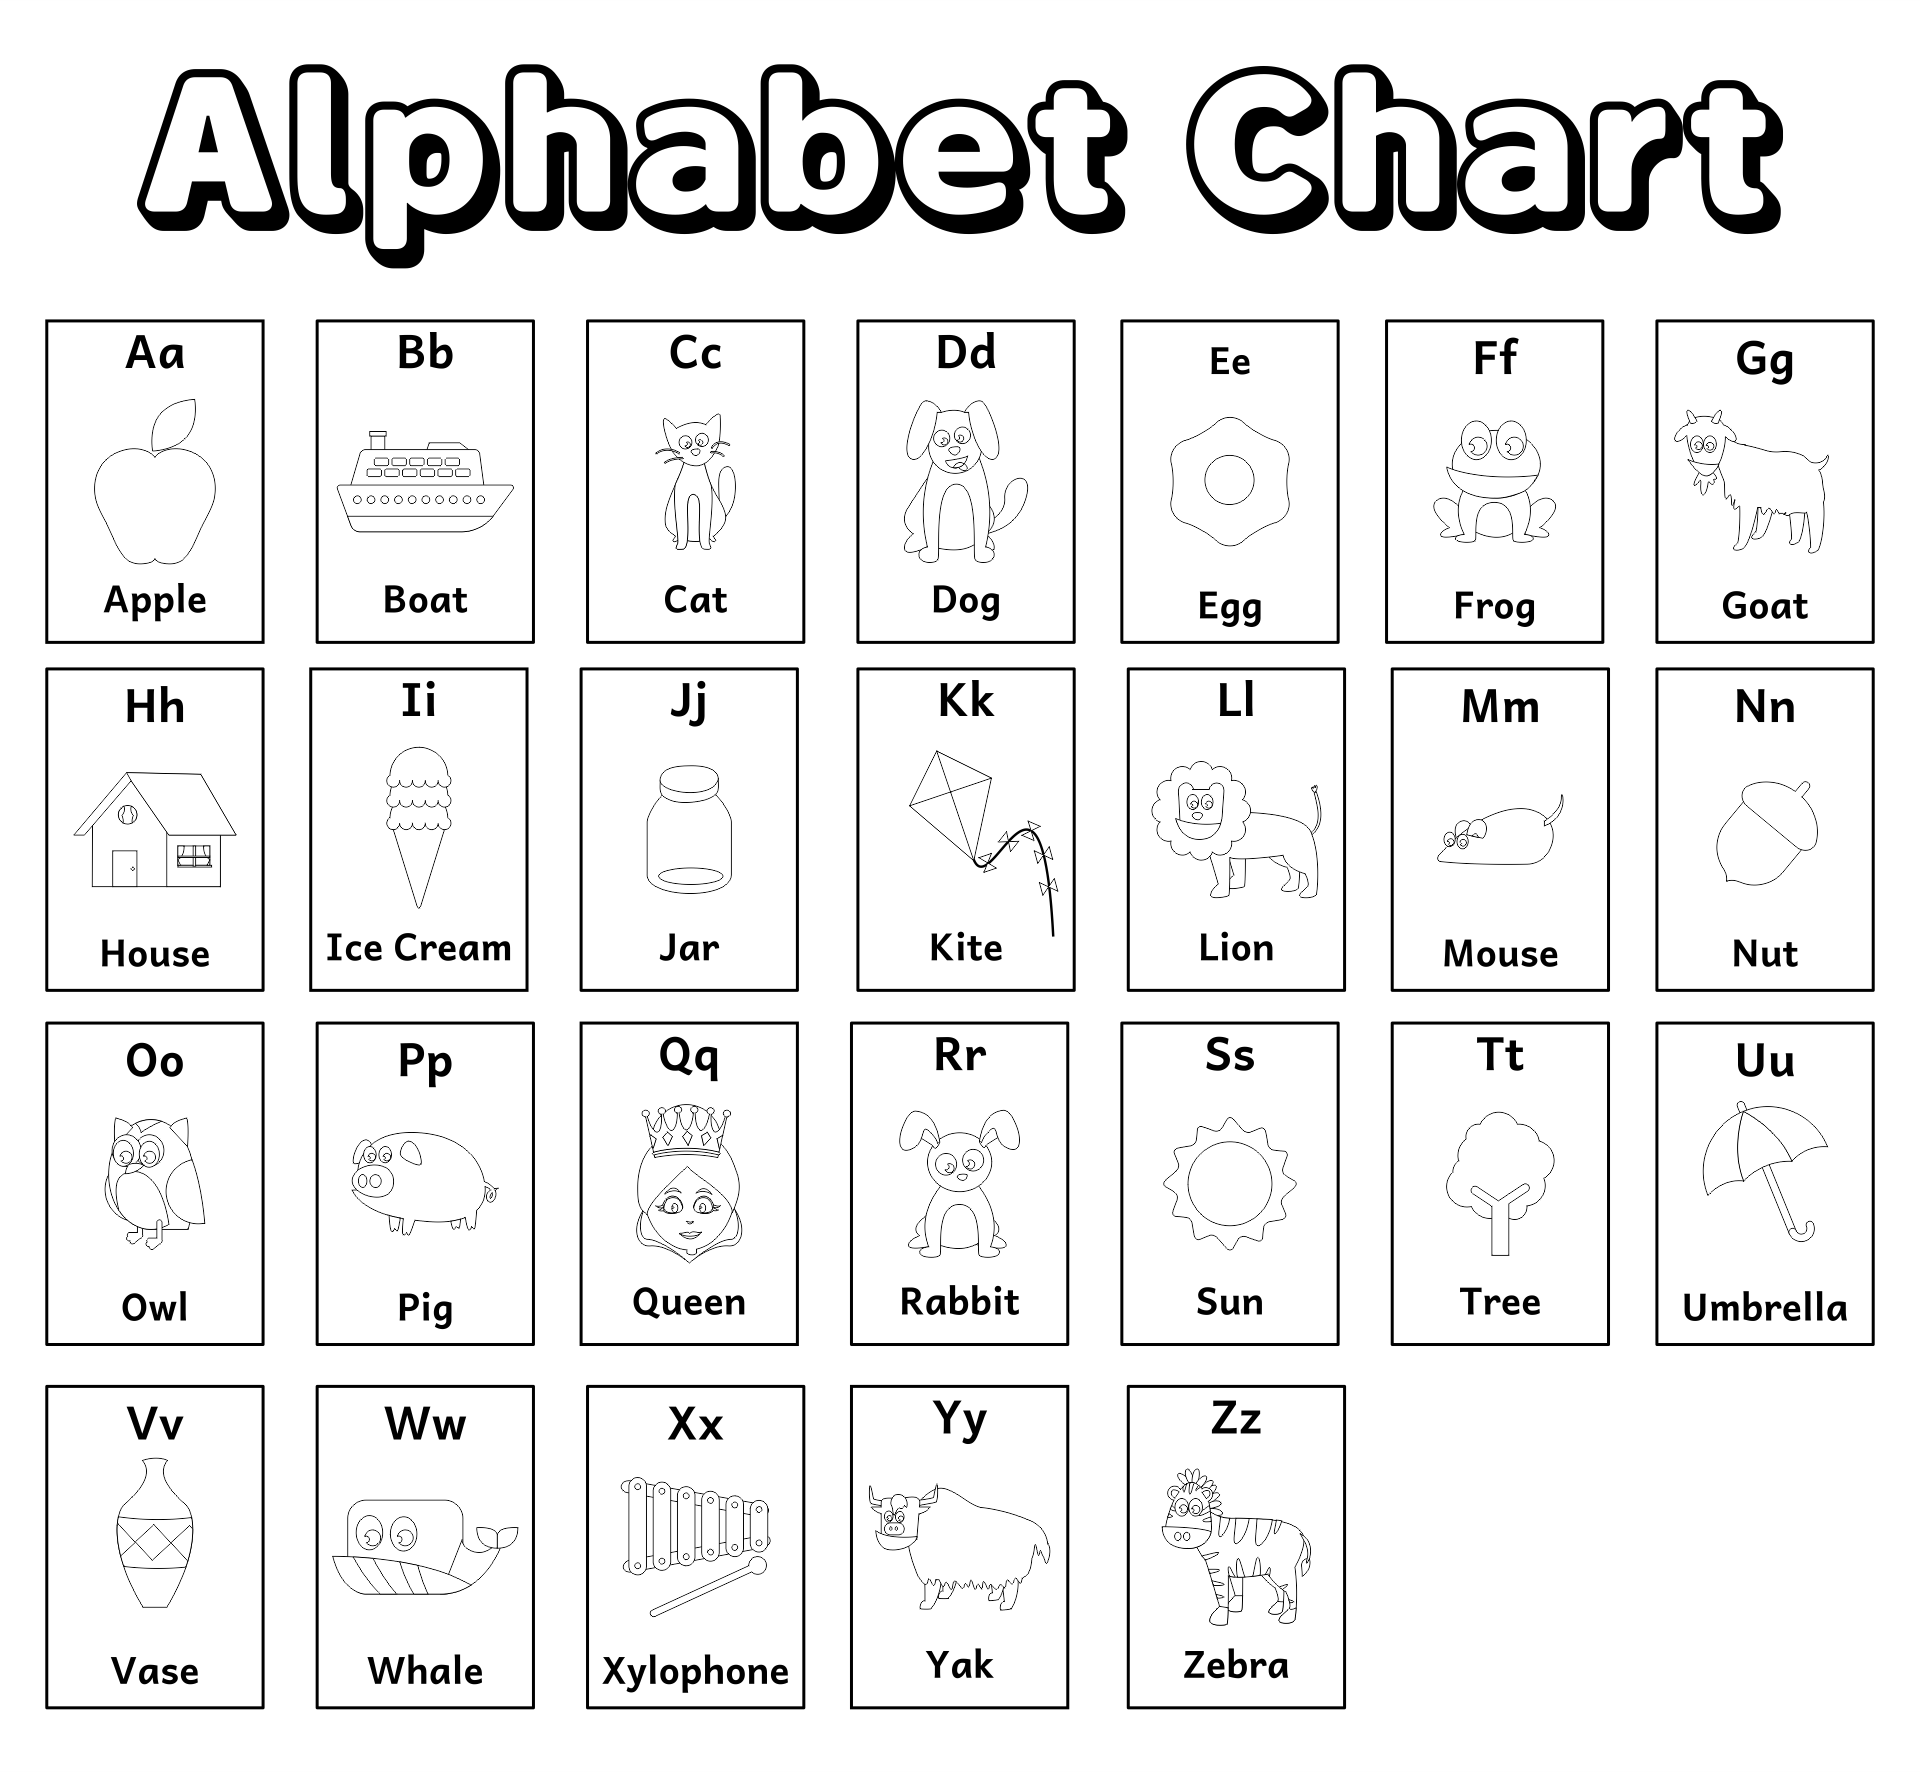 4-best-images-of-chart-full-page-alphabet-abc-printable-preschool-alphabet-chart-black-and